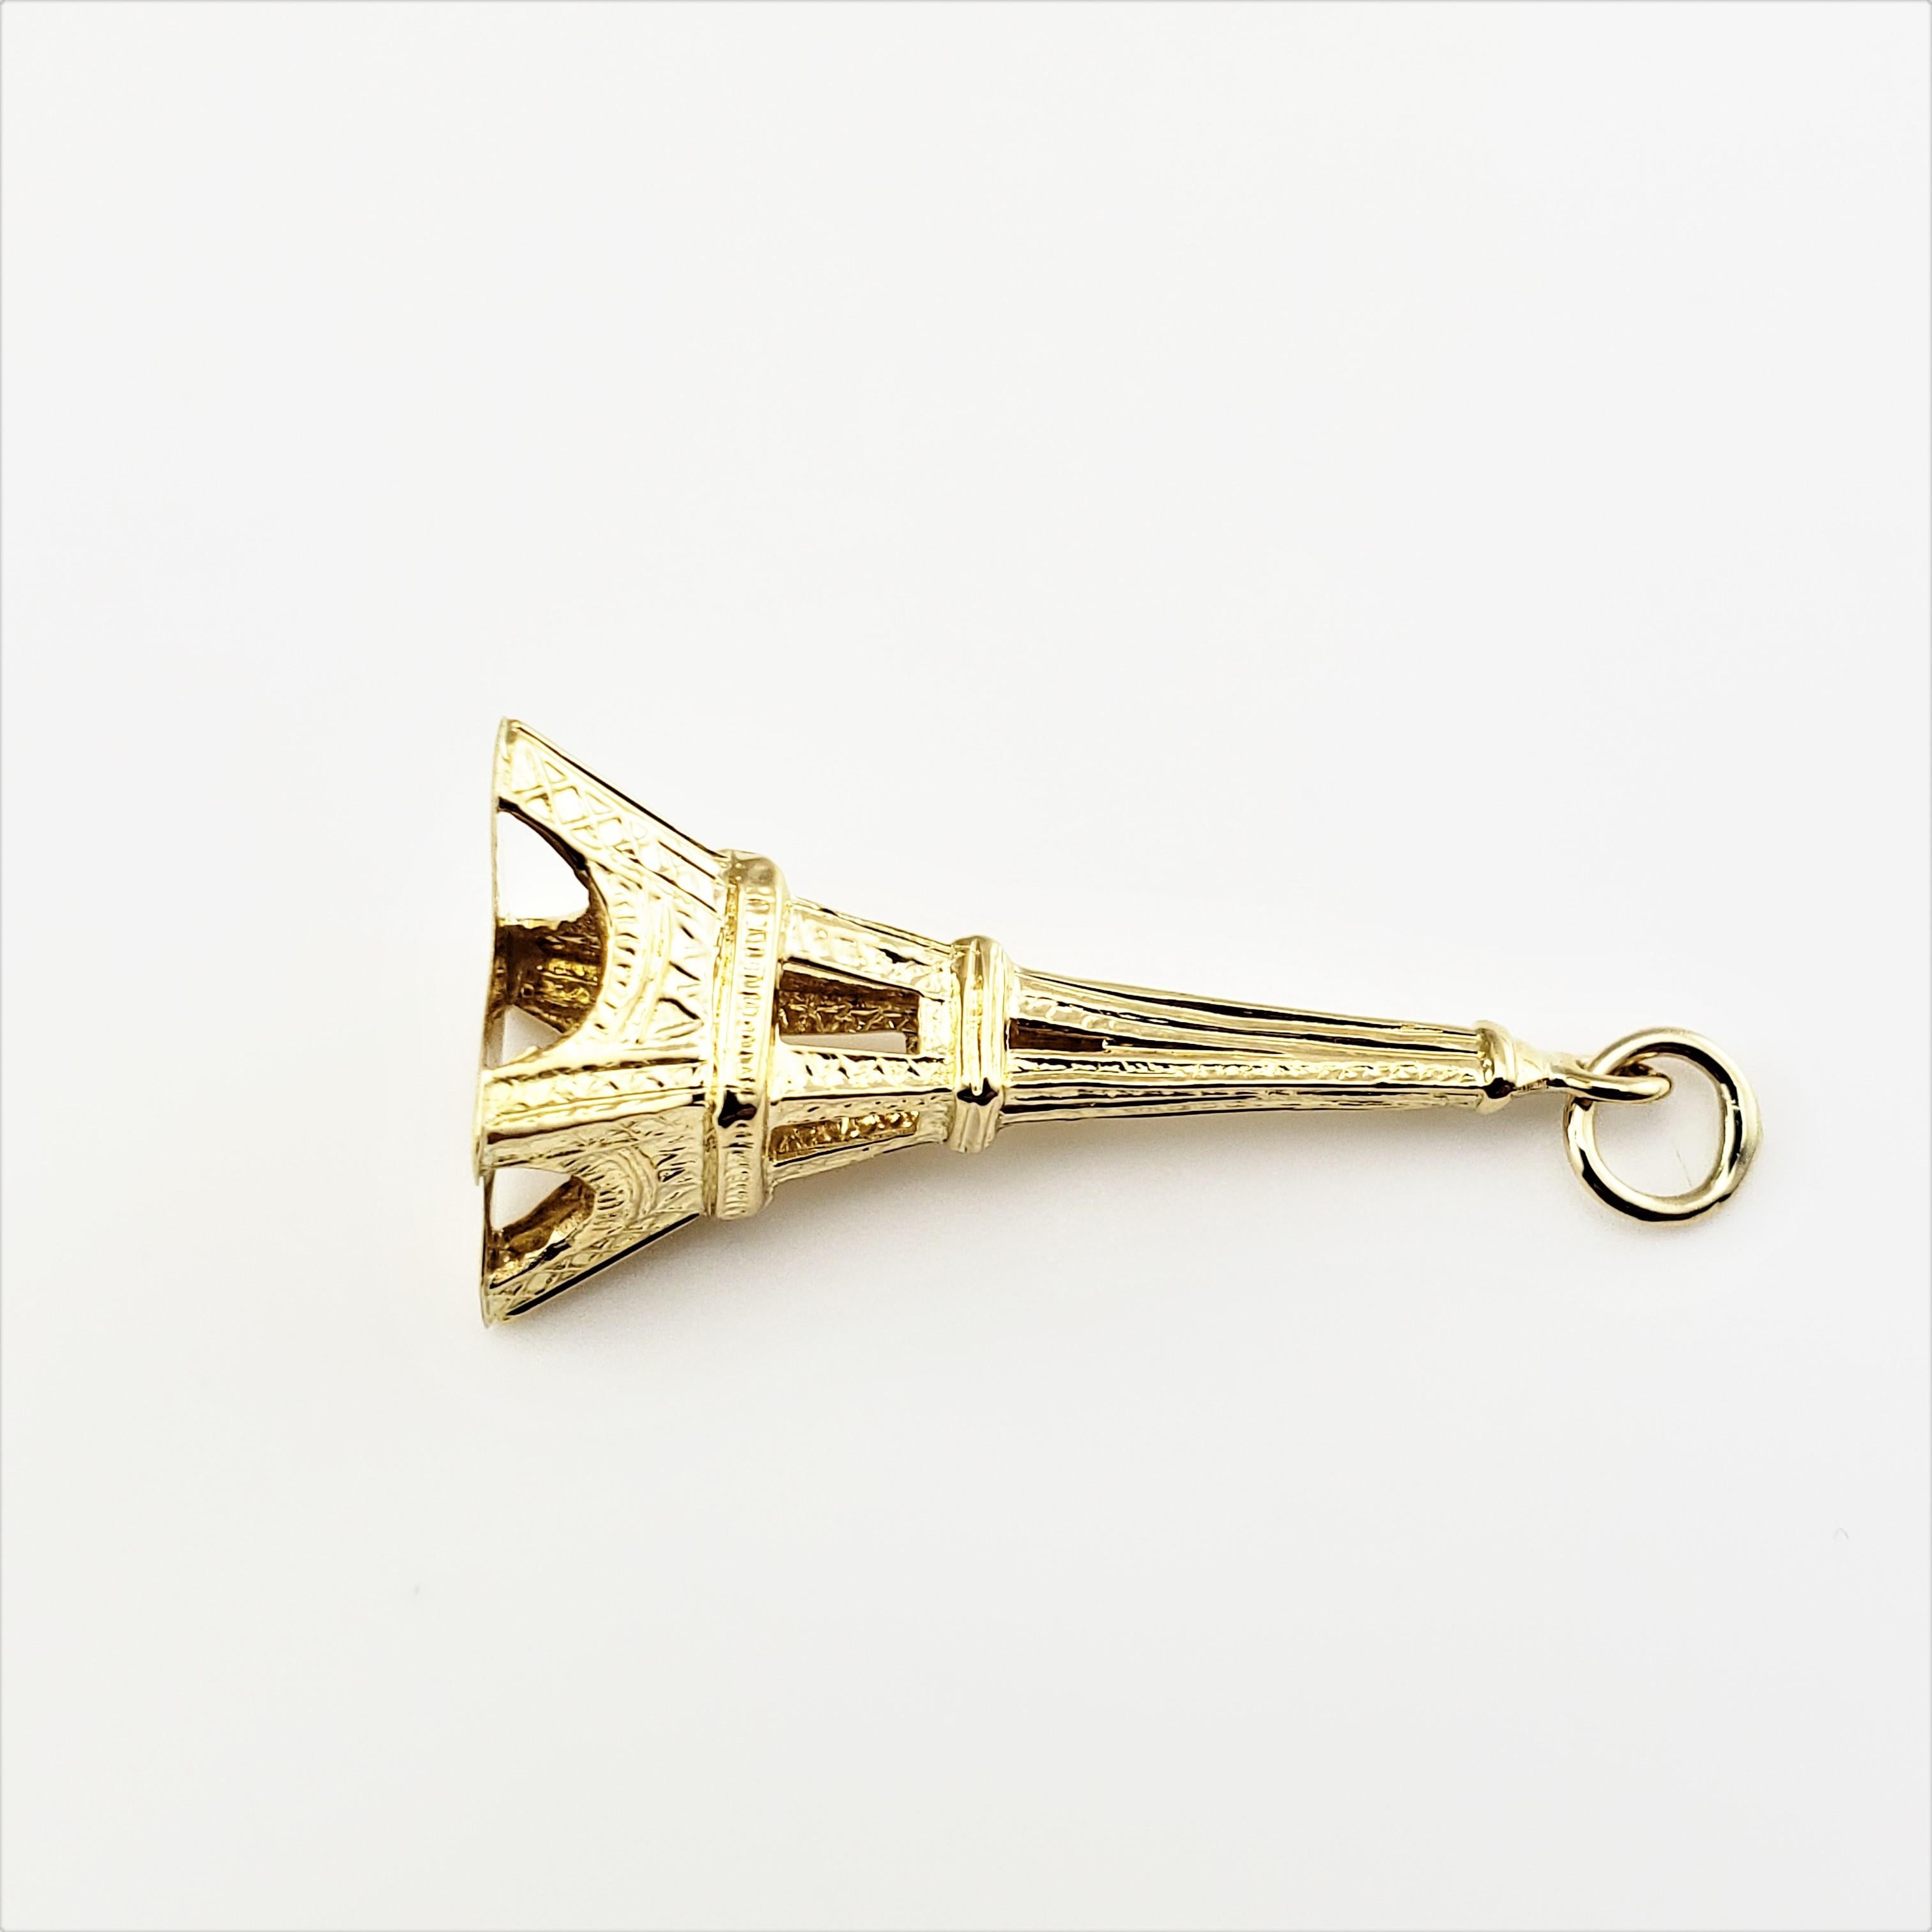 18 Karat Yellow Gold Eiffel Tower Charm-

Perfect addition to your travel charm collection!

This lovely 3D charm features the iconic Eiffel Tower meticulously detailed in 18K yellow gold.

*Chain not included

Size:  33 mm x  12 mm (actual